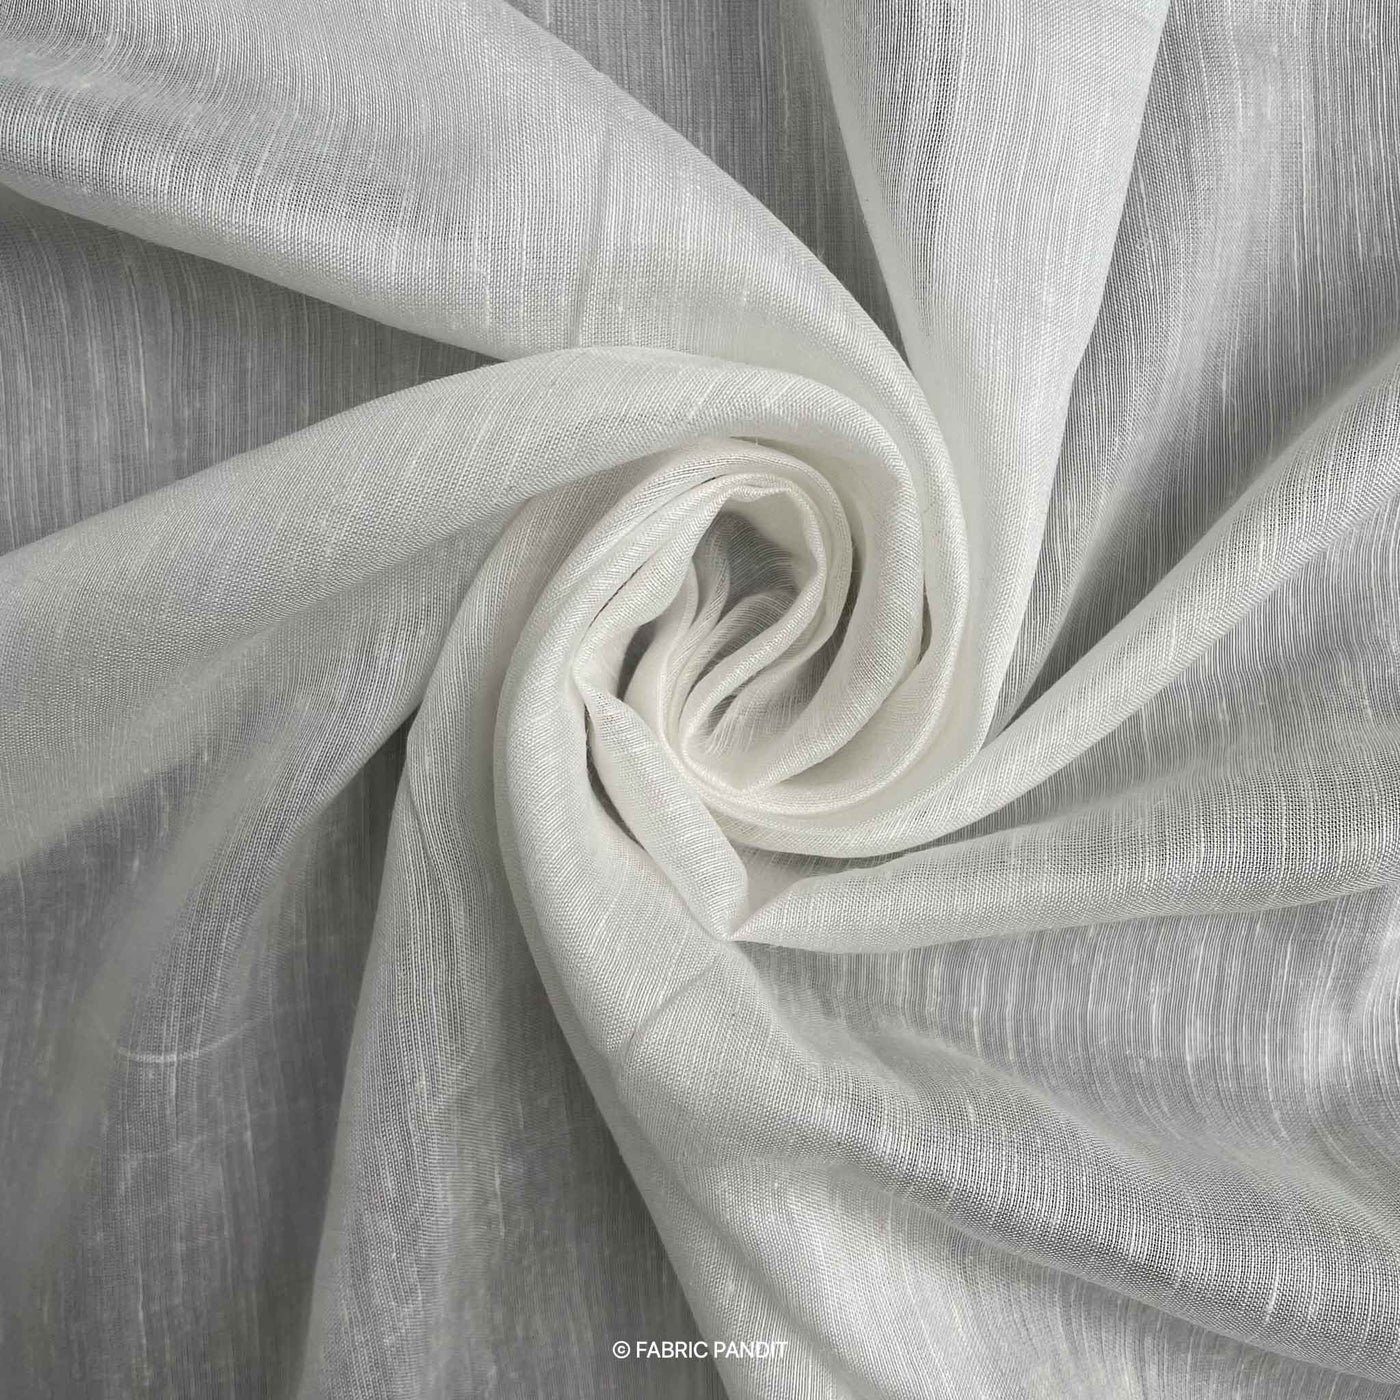 Fabric Pandit Fabric White Plain Dyeable Pure Bemberg Silk Linen Fabric (Width 44 inches)